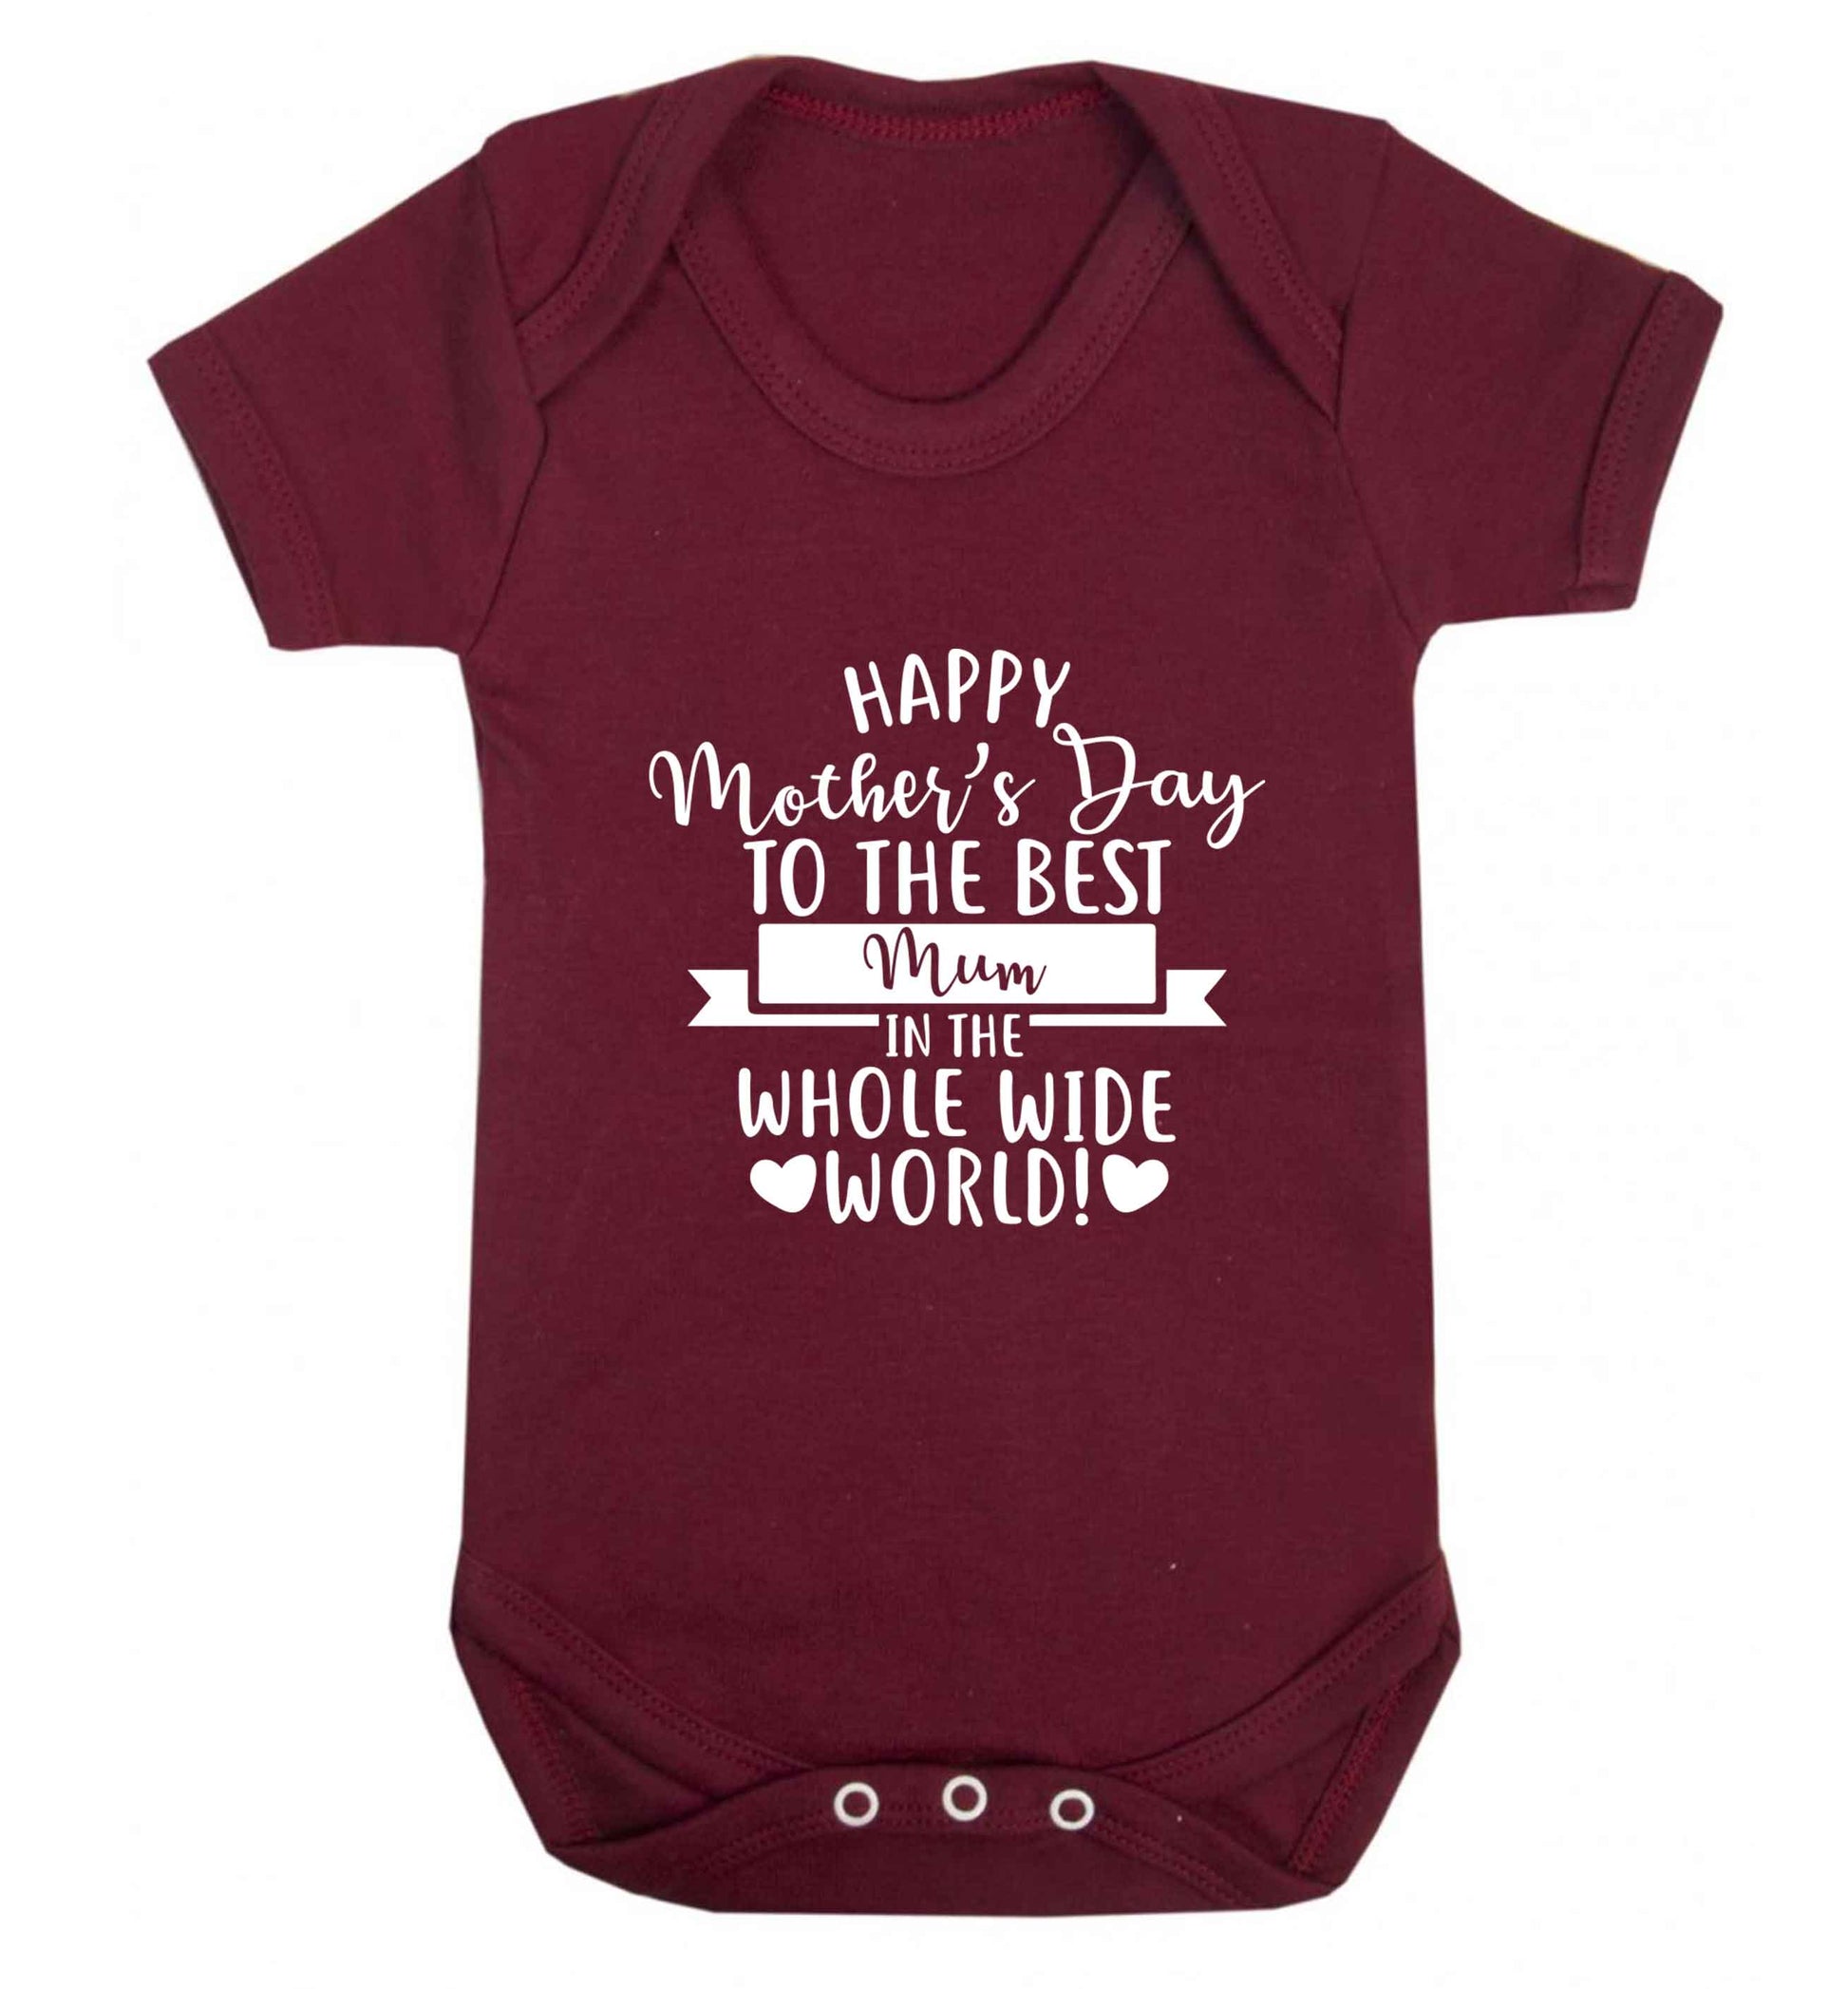 Happy mother's day to the best mum in the world baby vest maroon 18-24 months